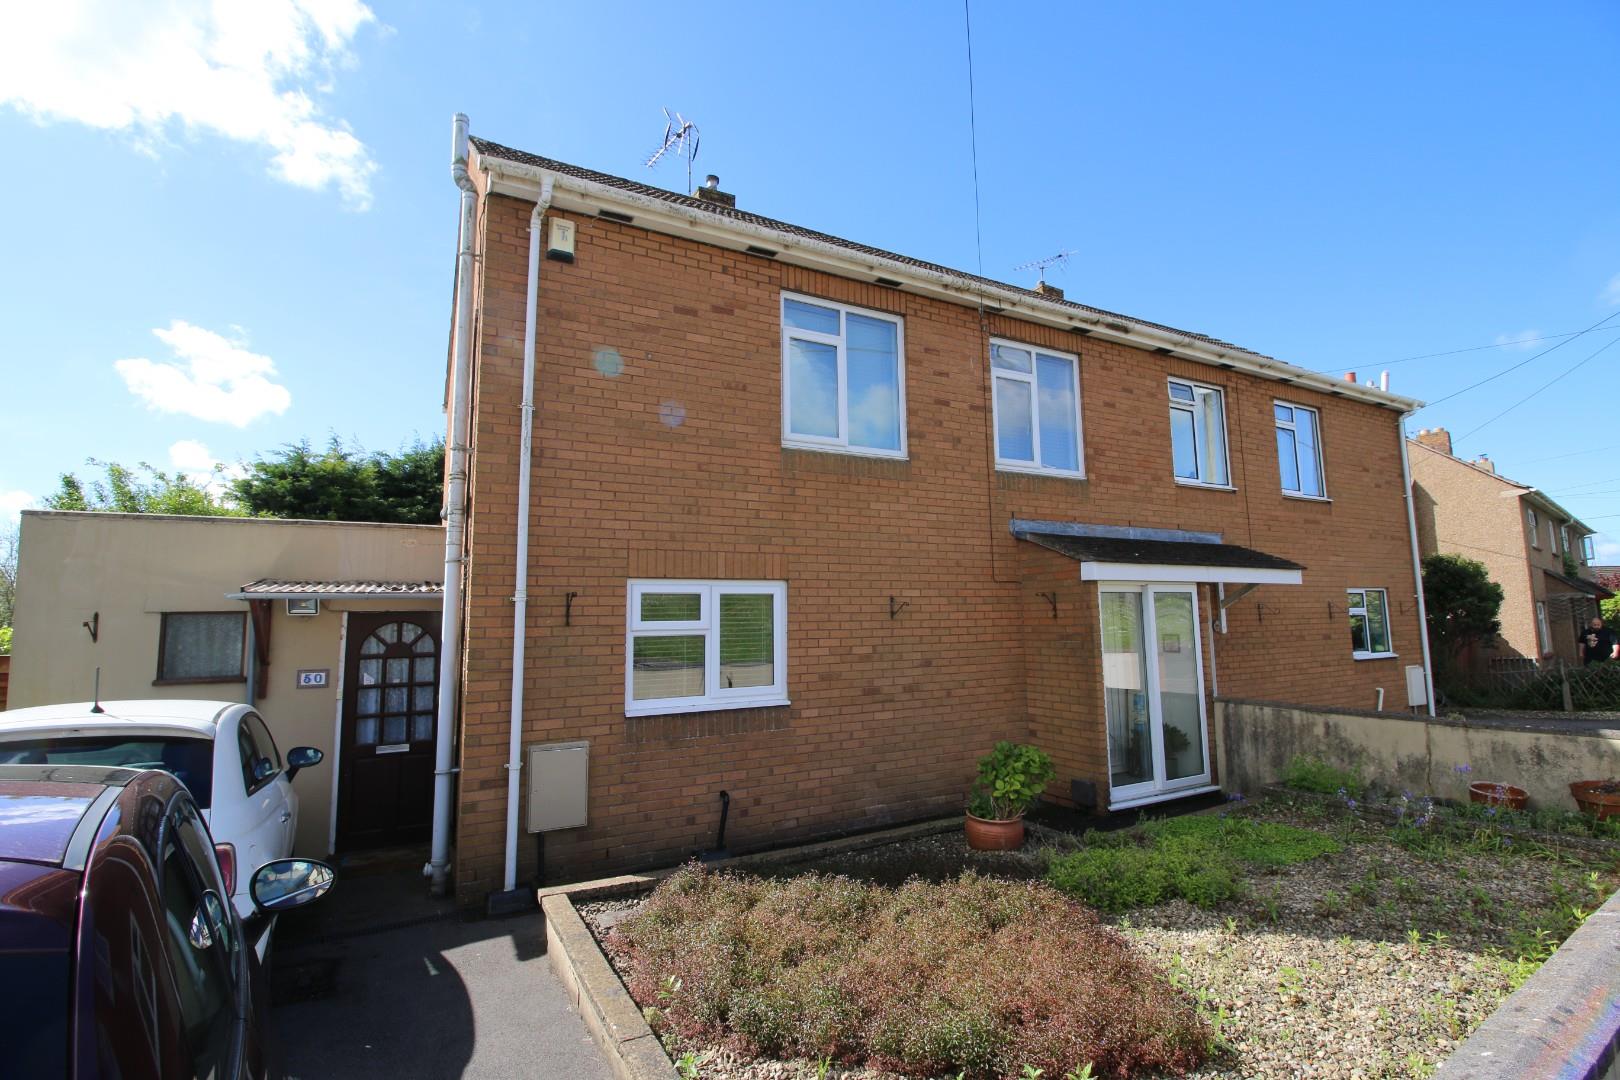 Immaculate three bedroom family home in the village of Congresbury